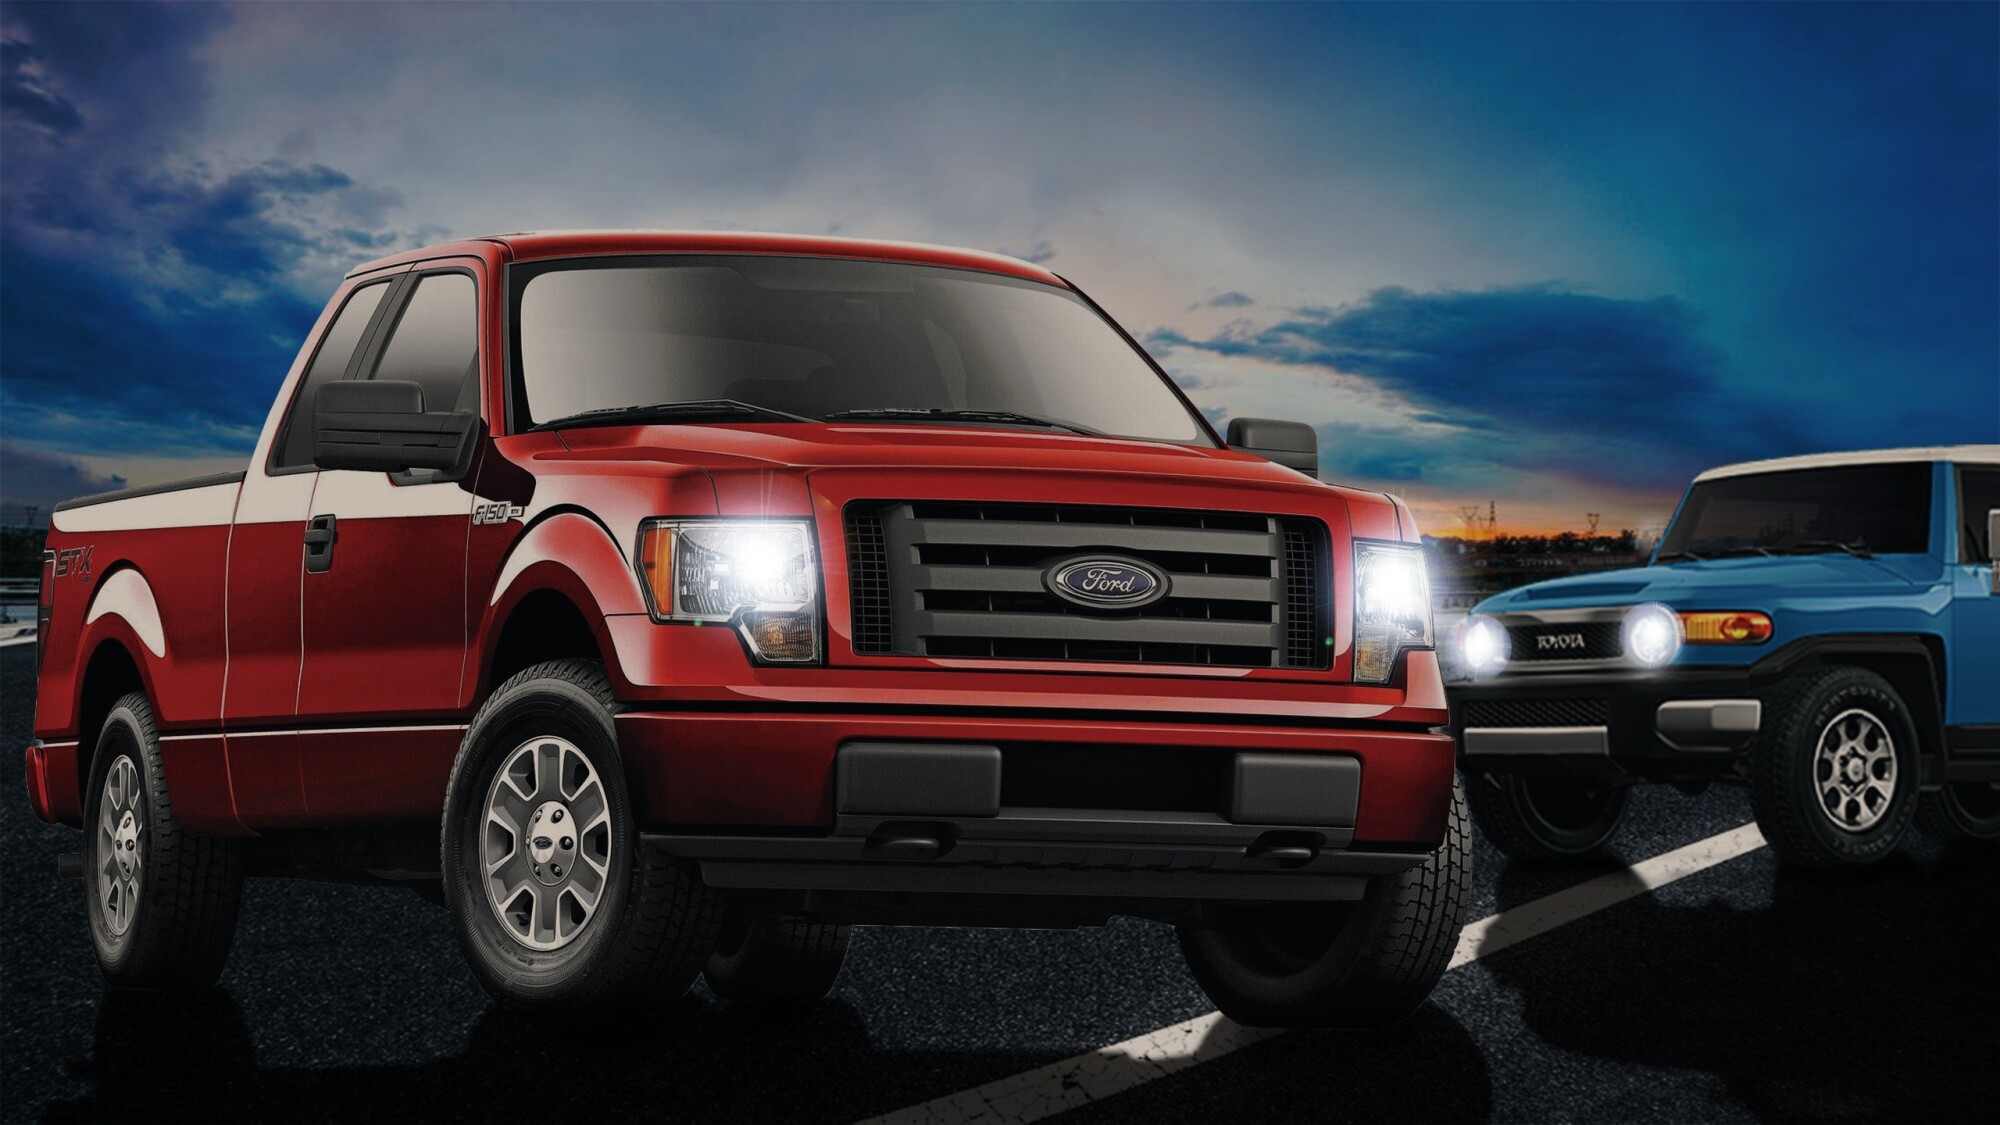 Used Ford Trucks for Sale